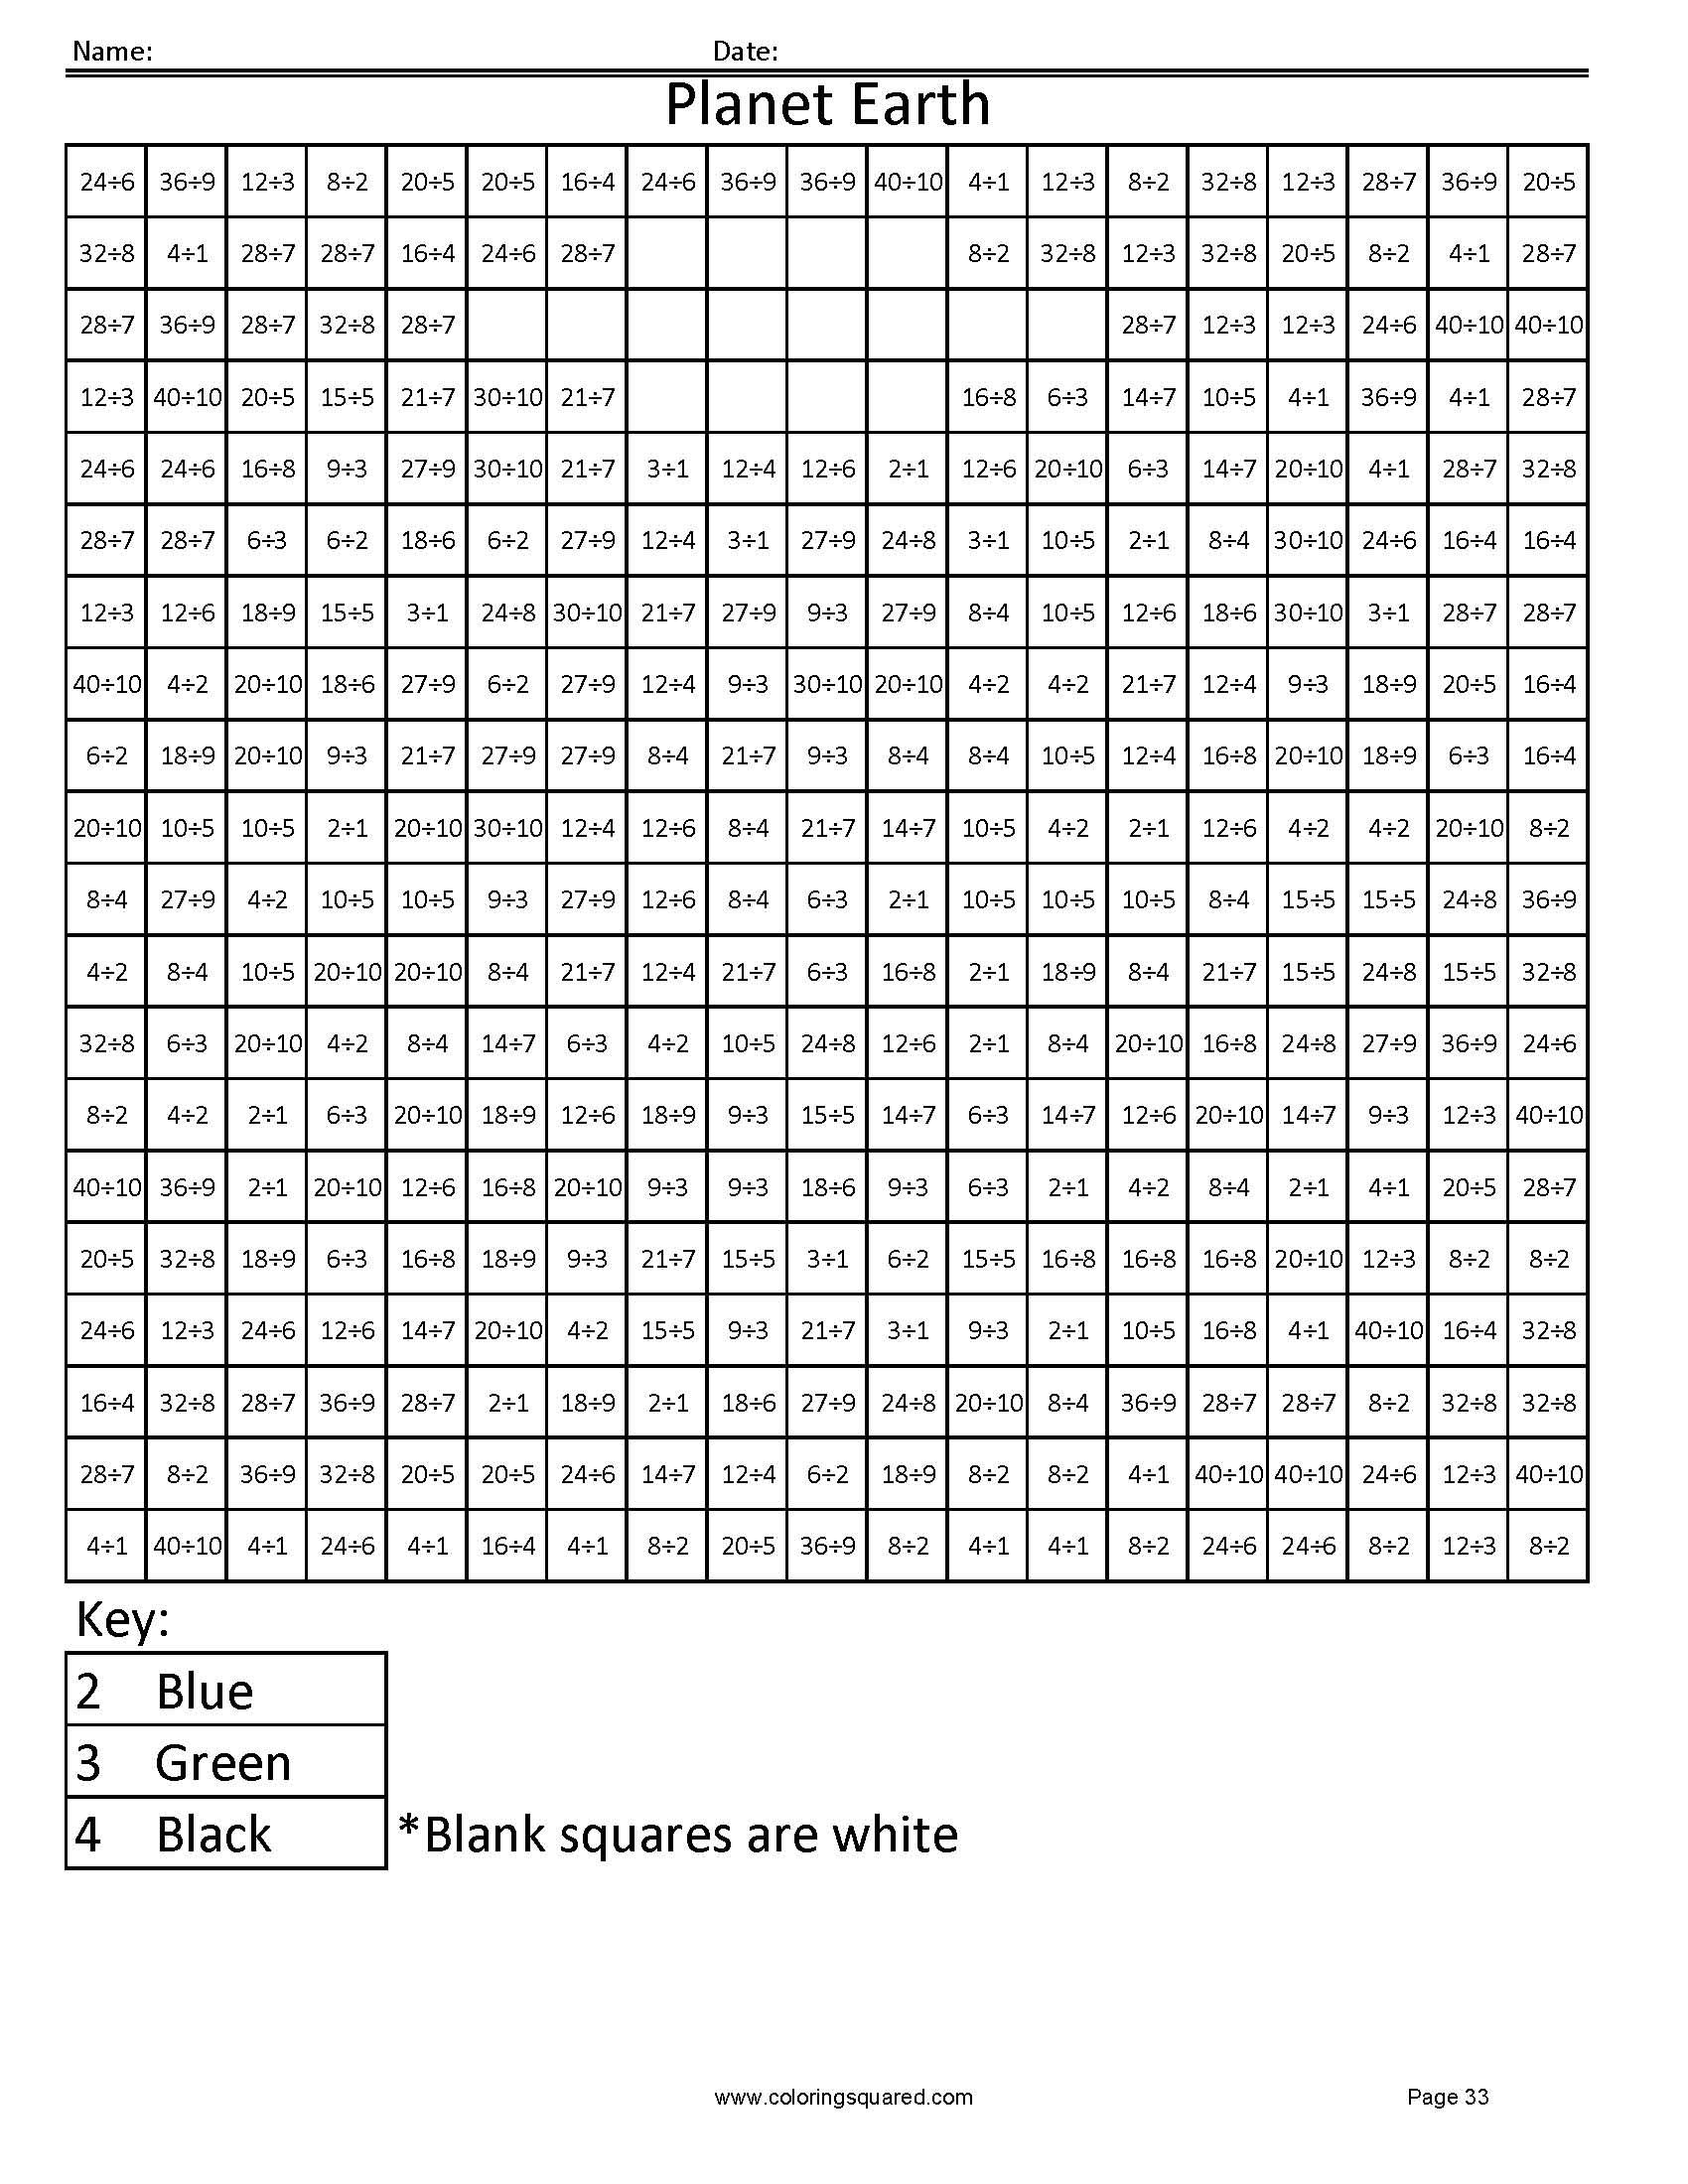 numeracy-square-numbers-worksheet-primaryleap-co-uk